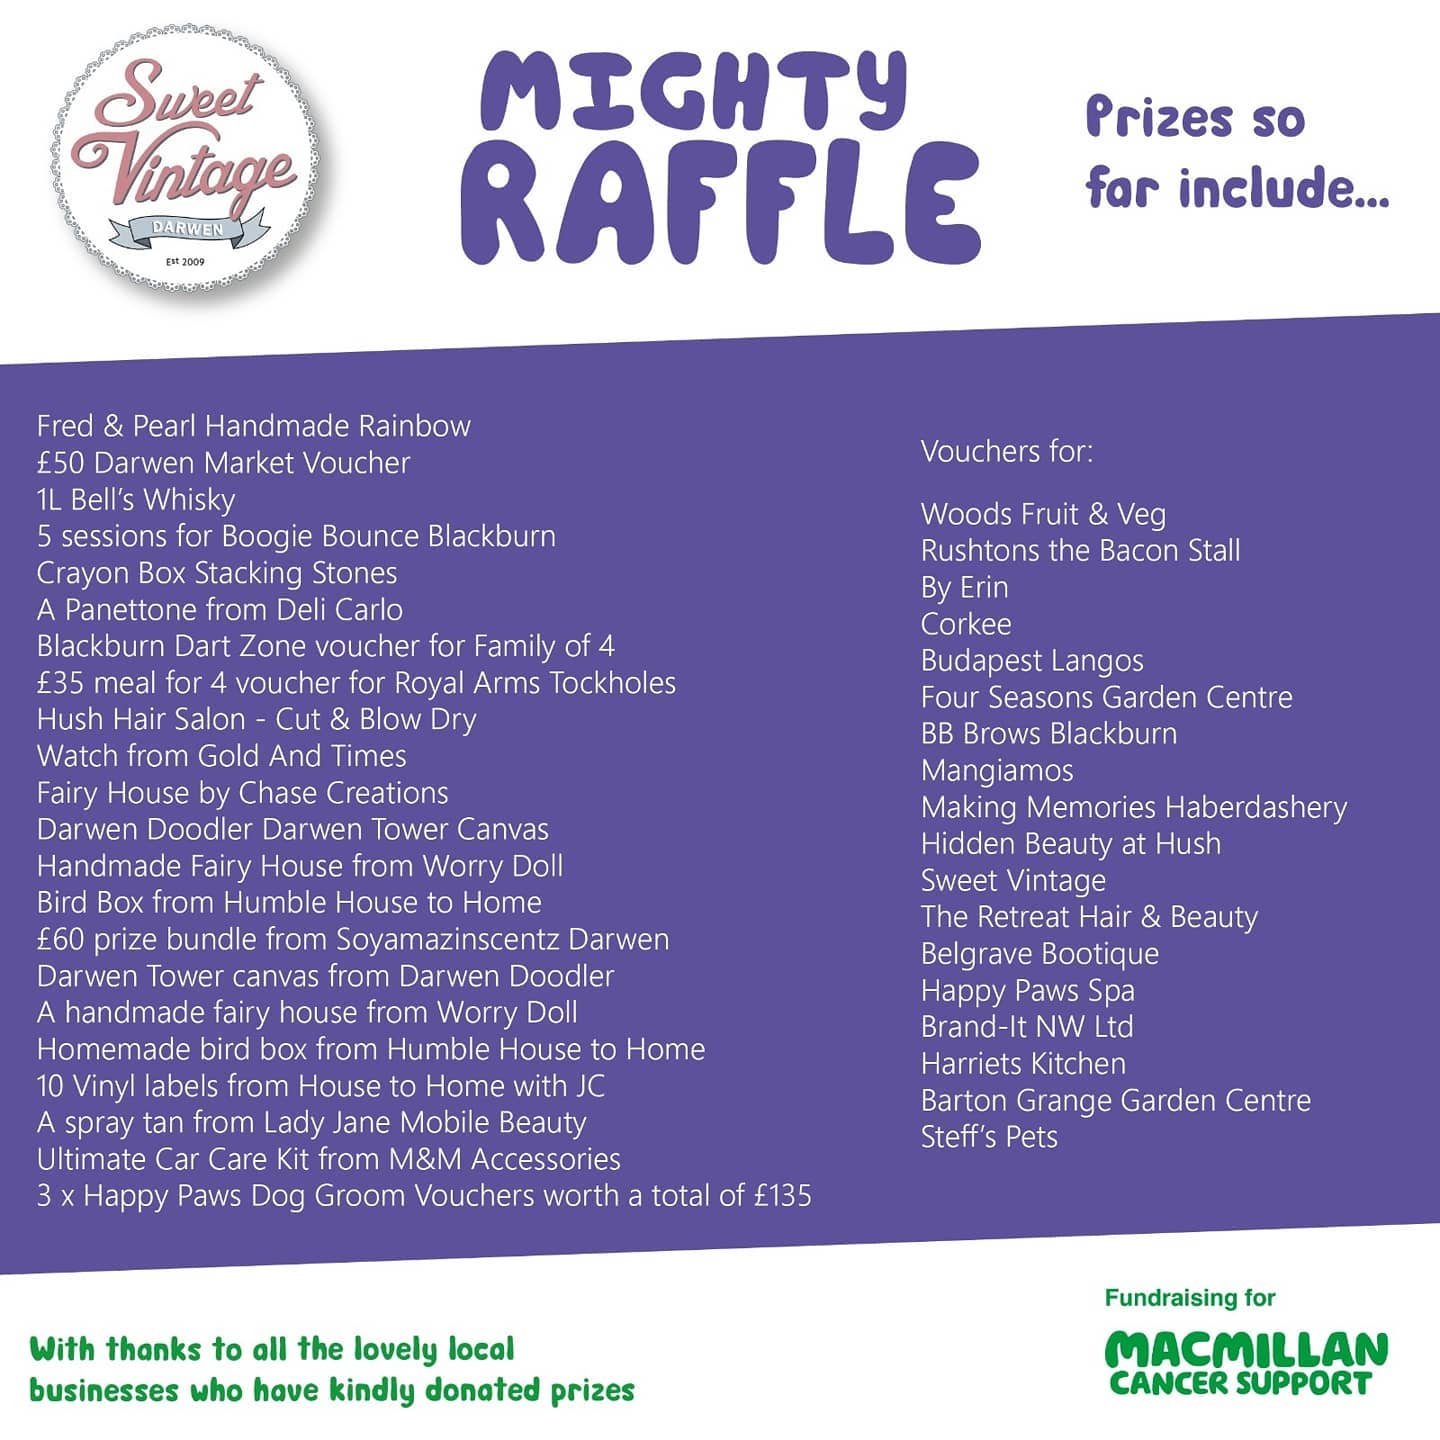 Darwen Businesses Donate to Mighty Raffle in Aid of Macmillan